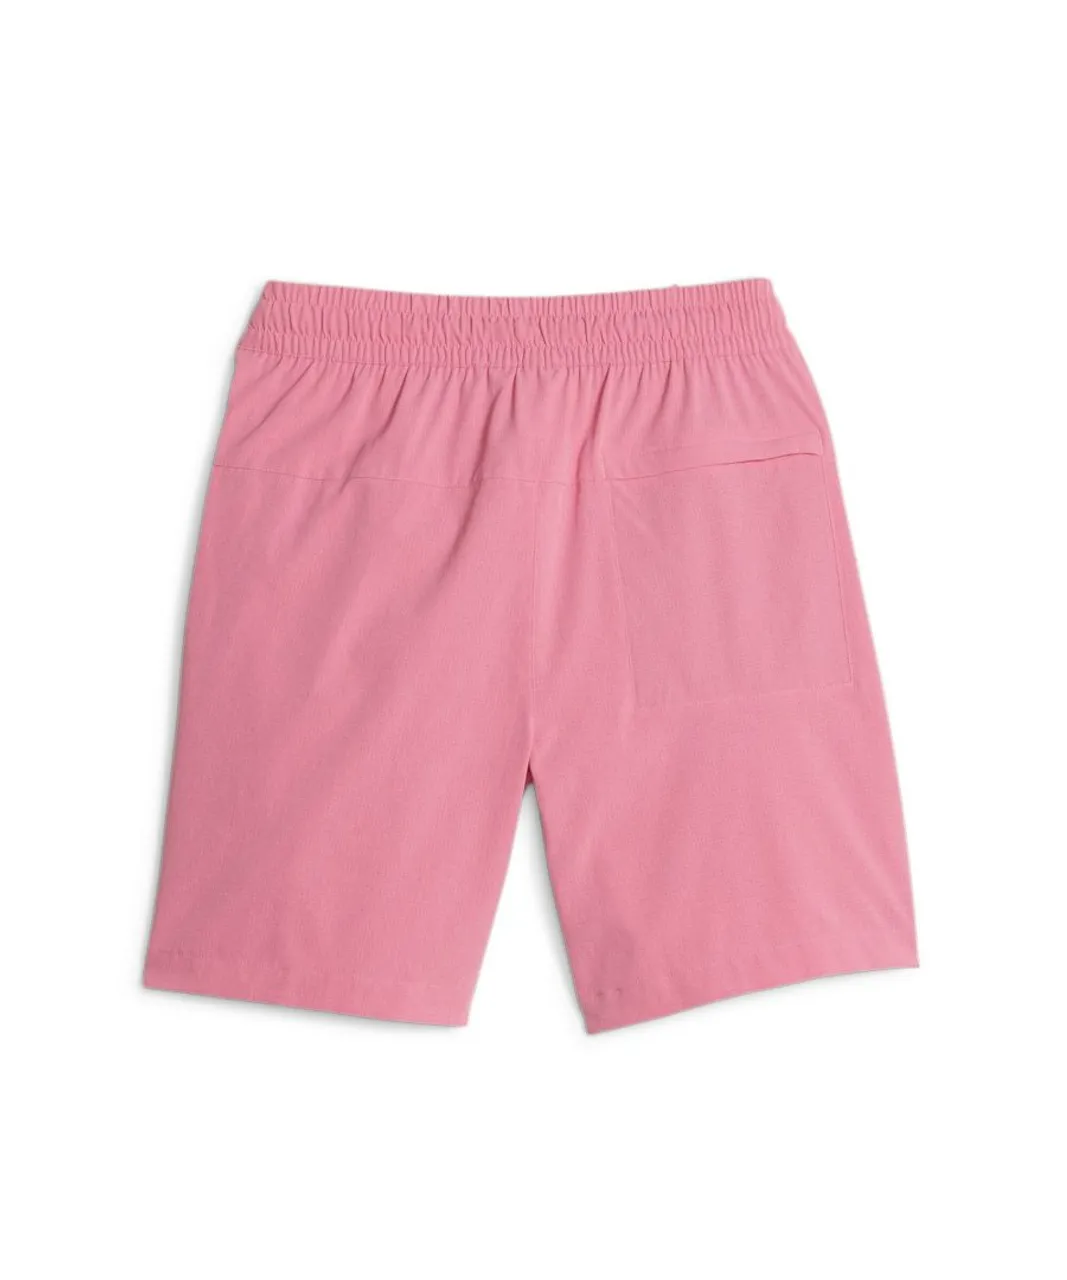 Puma x Palm Tree Mens Crew Vented Golf Shorts - Pink polyester recycled